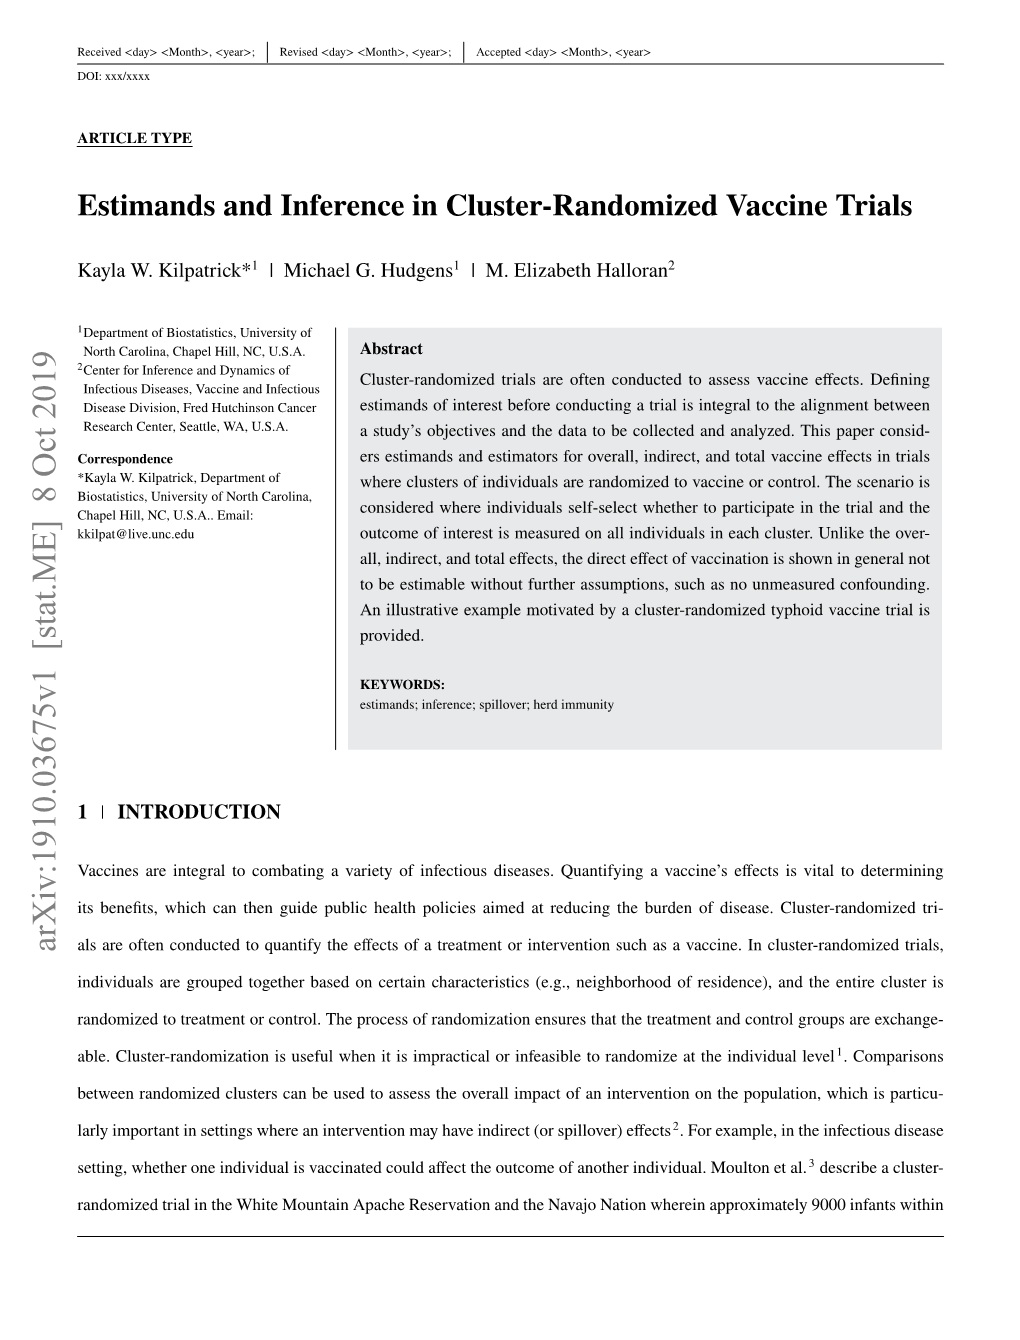 Estimands and Inference in Cluster-Randomized Vaccine Trials